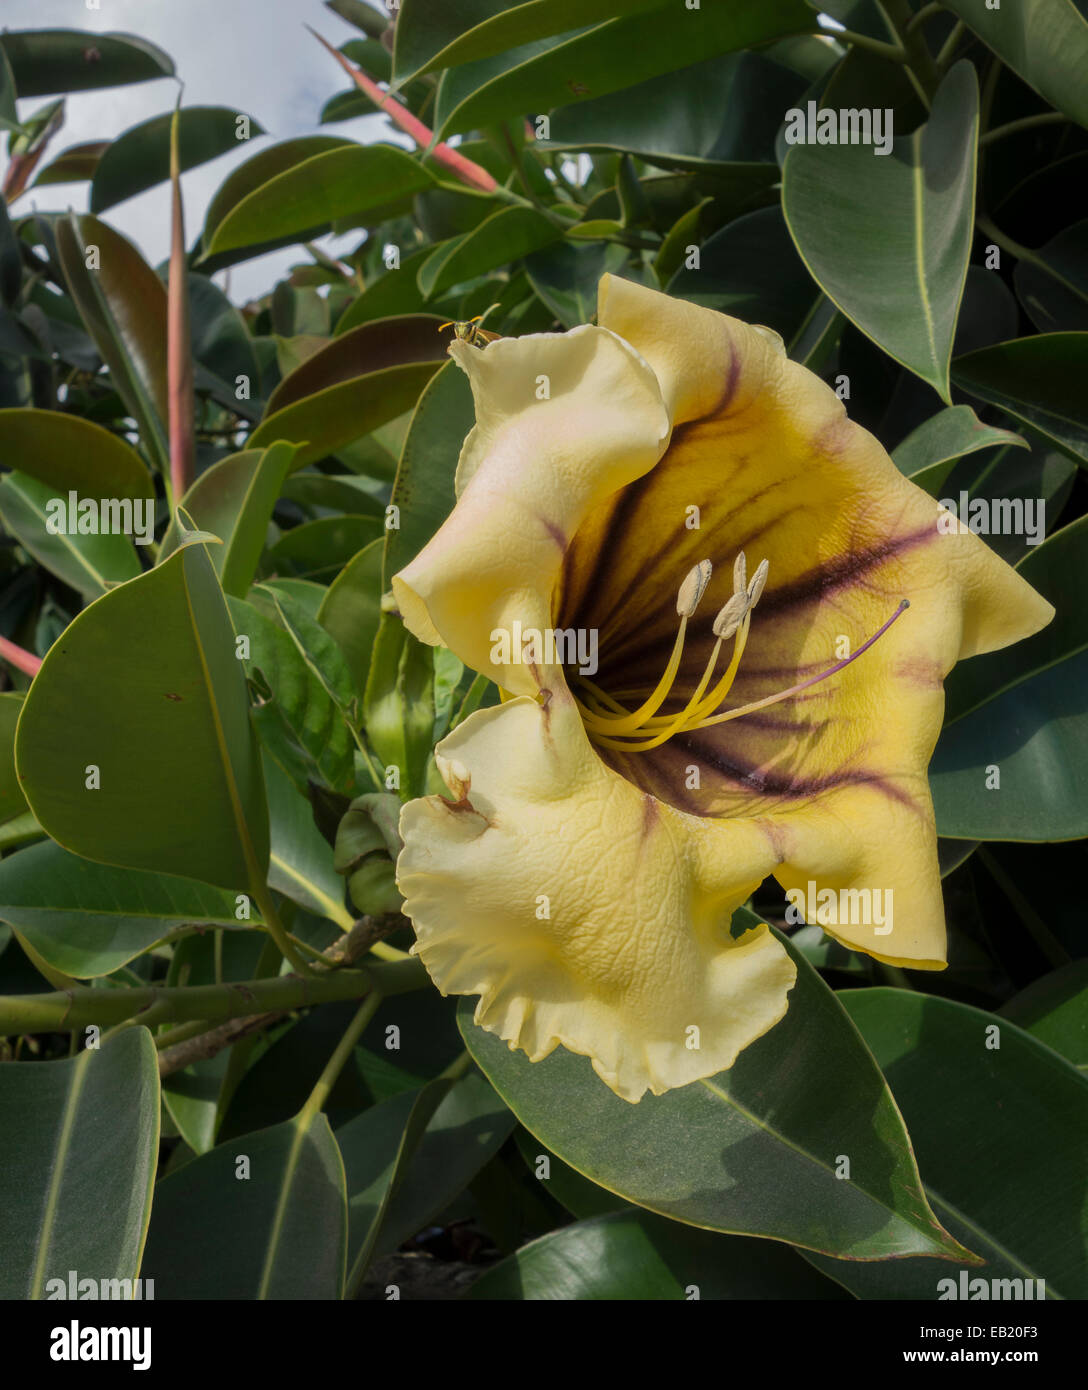 Solandra maxima, generally known as Cup of Gold Vine, Golden Chalice Vine, or Hawaiian Lily. This picture was taken in Malta. Stock Photo